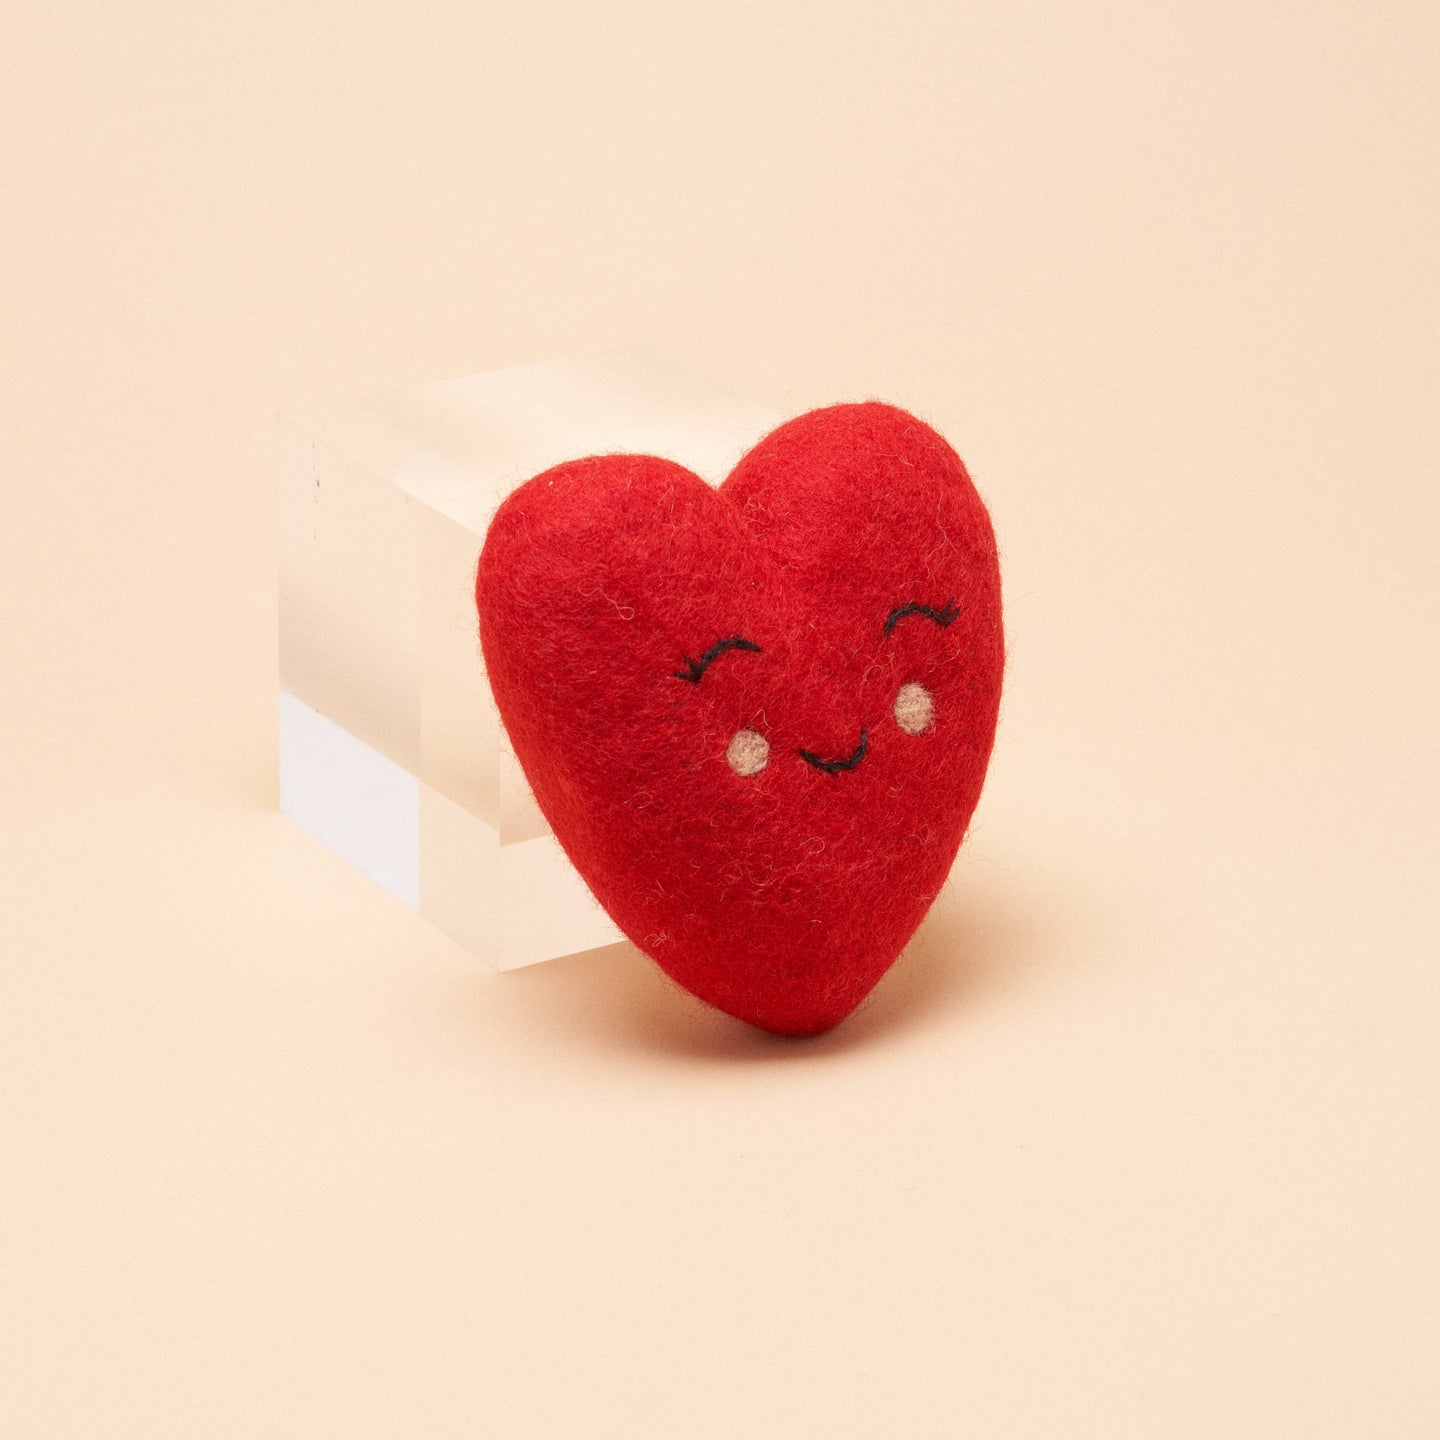 Handrolled Heart Toy